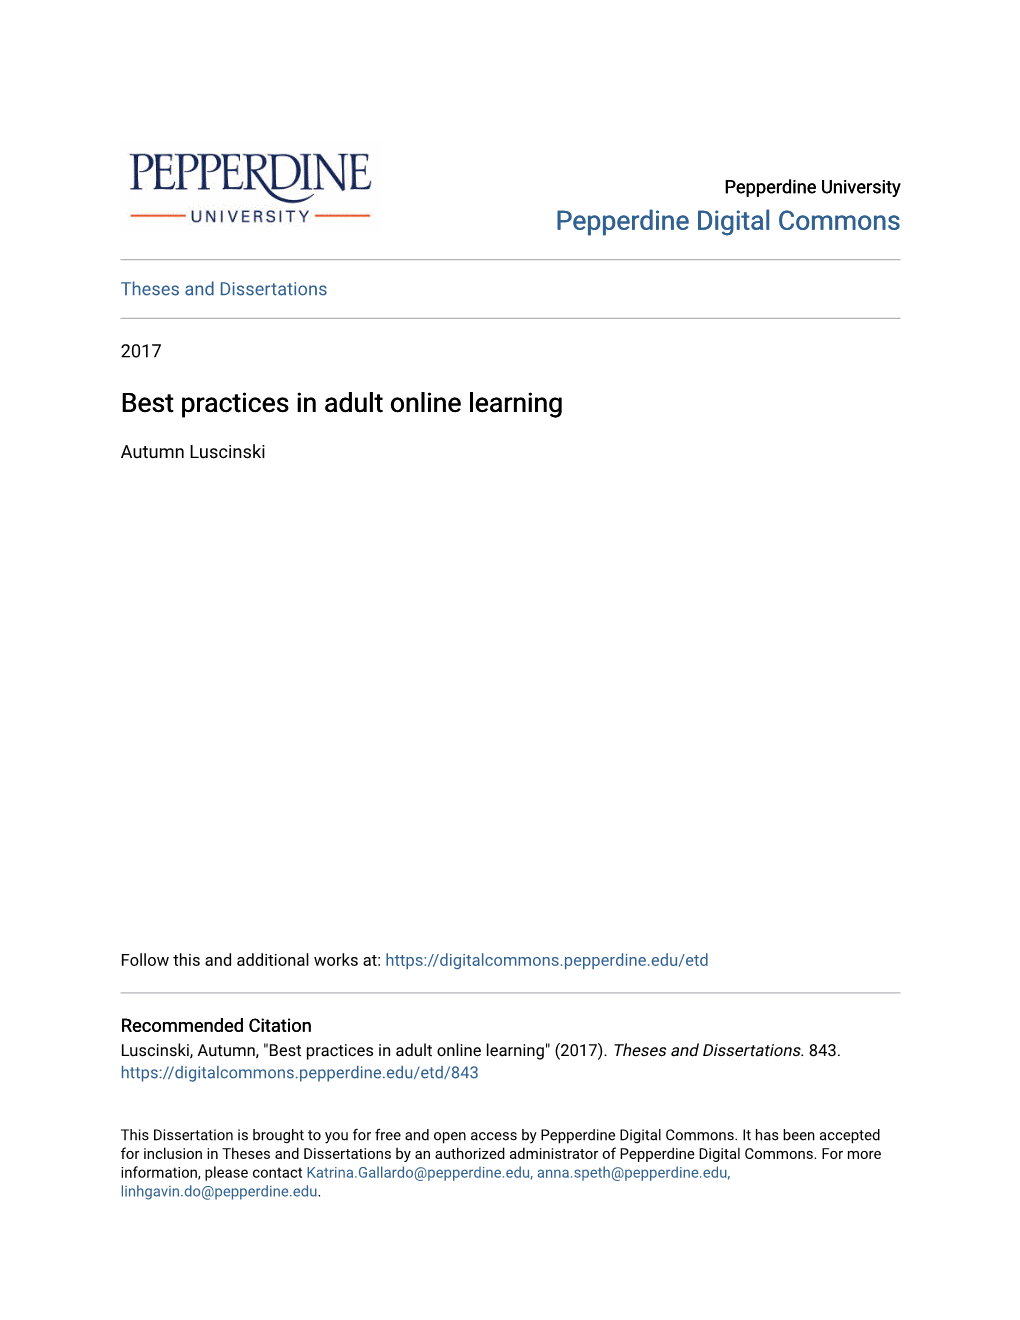 Best Practices in Adult Online Learning